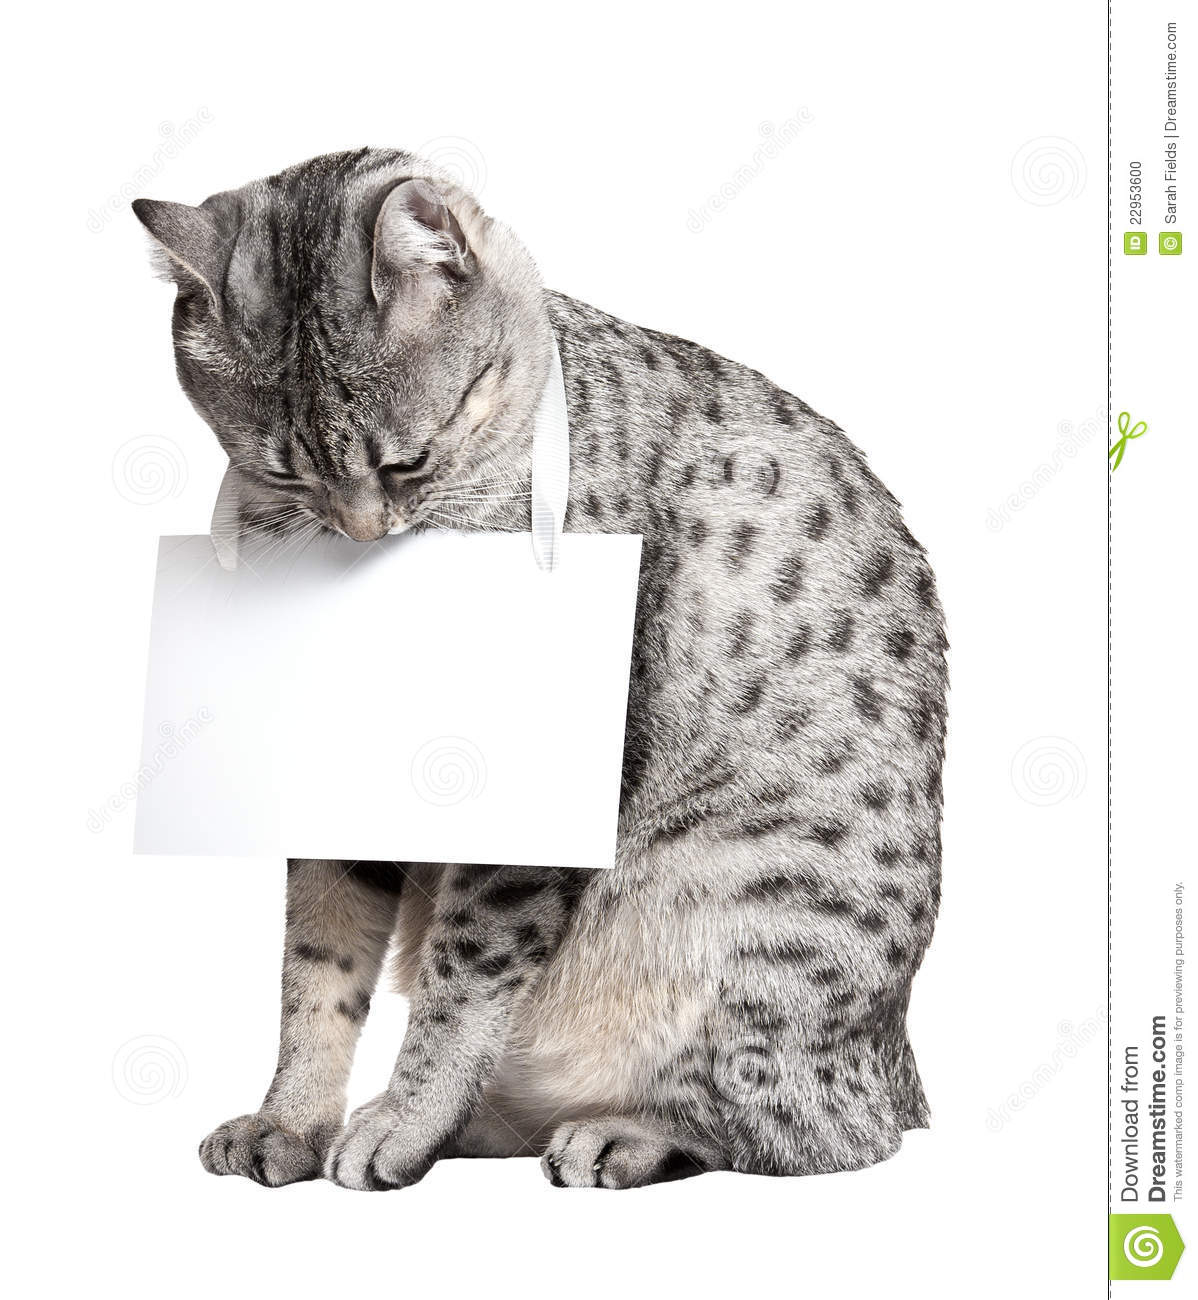 Cute Egyptian Mau Breed Cat Reading The Sign She Is Holding